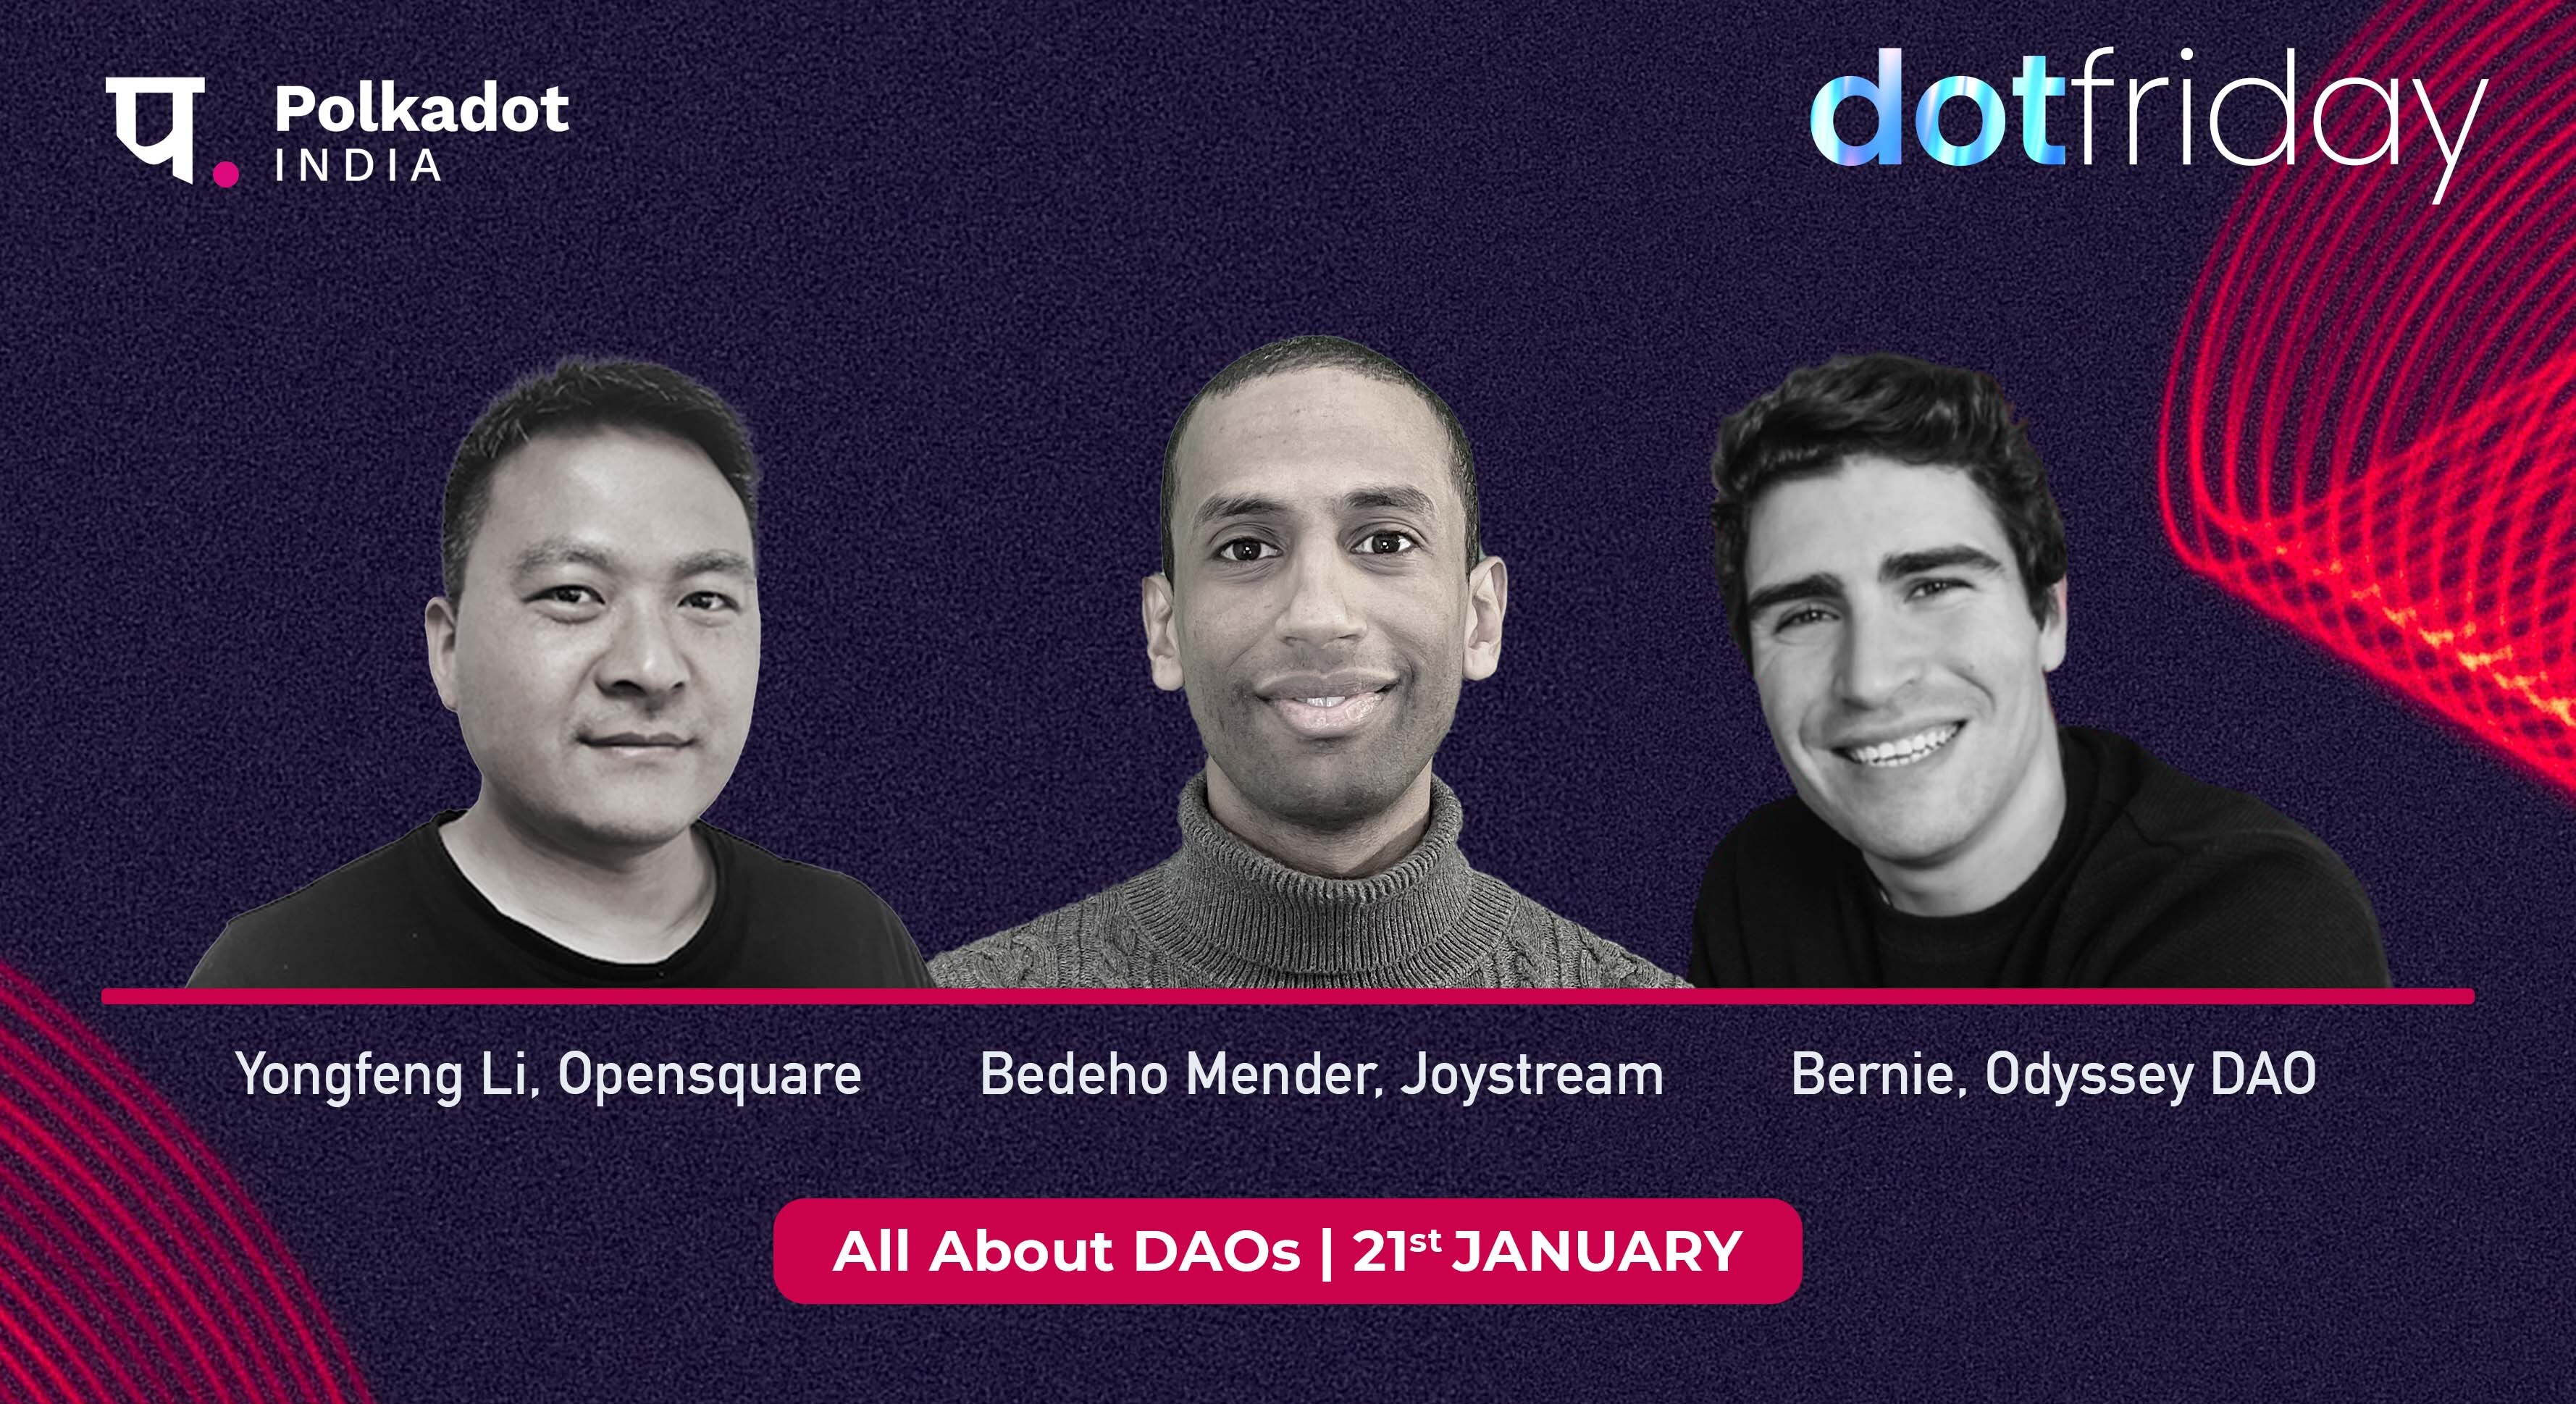 DotFriday by Polkadot India - The DAO chapter, Online Event